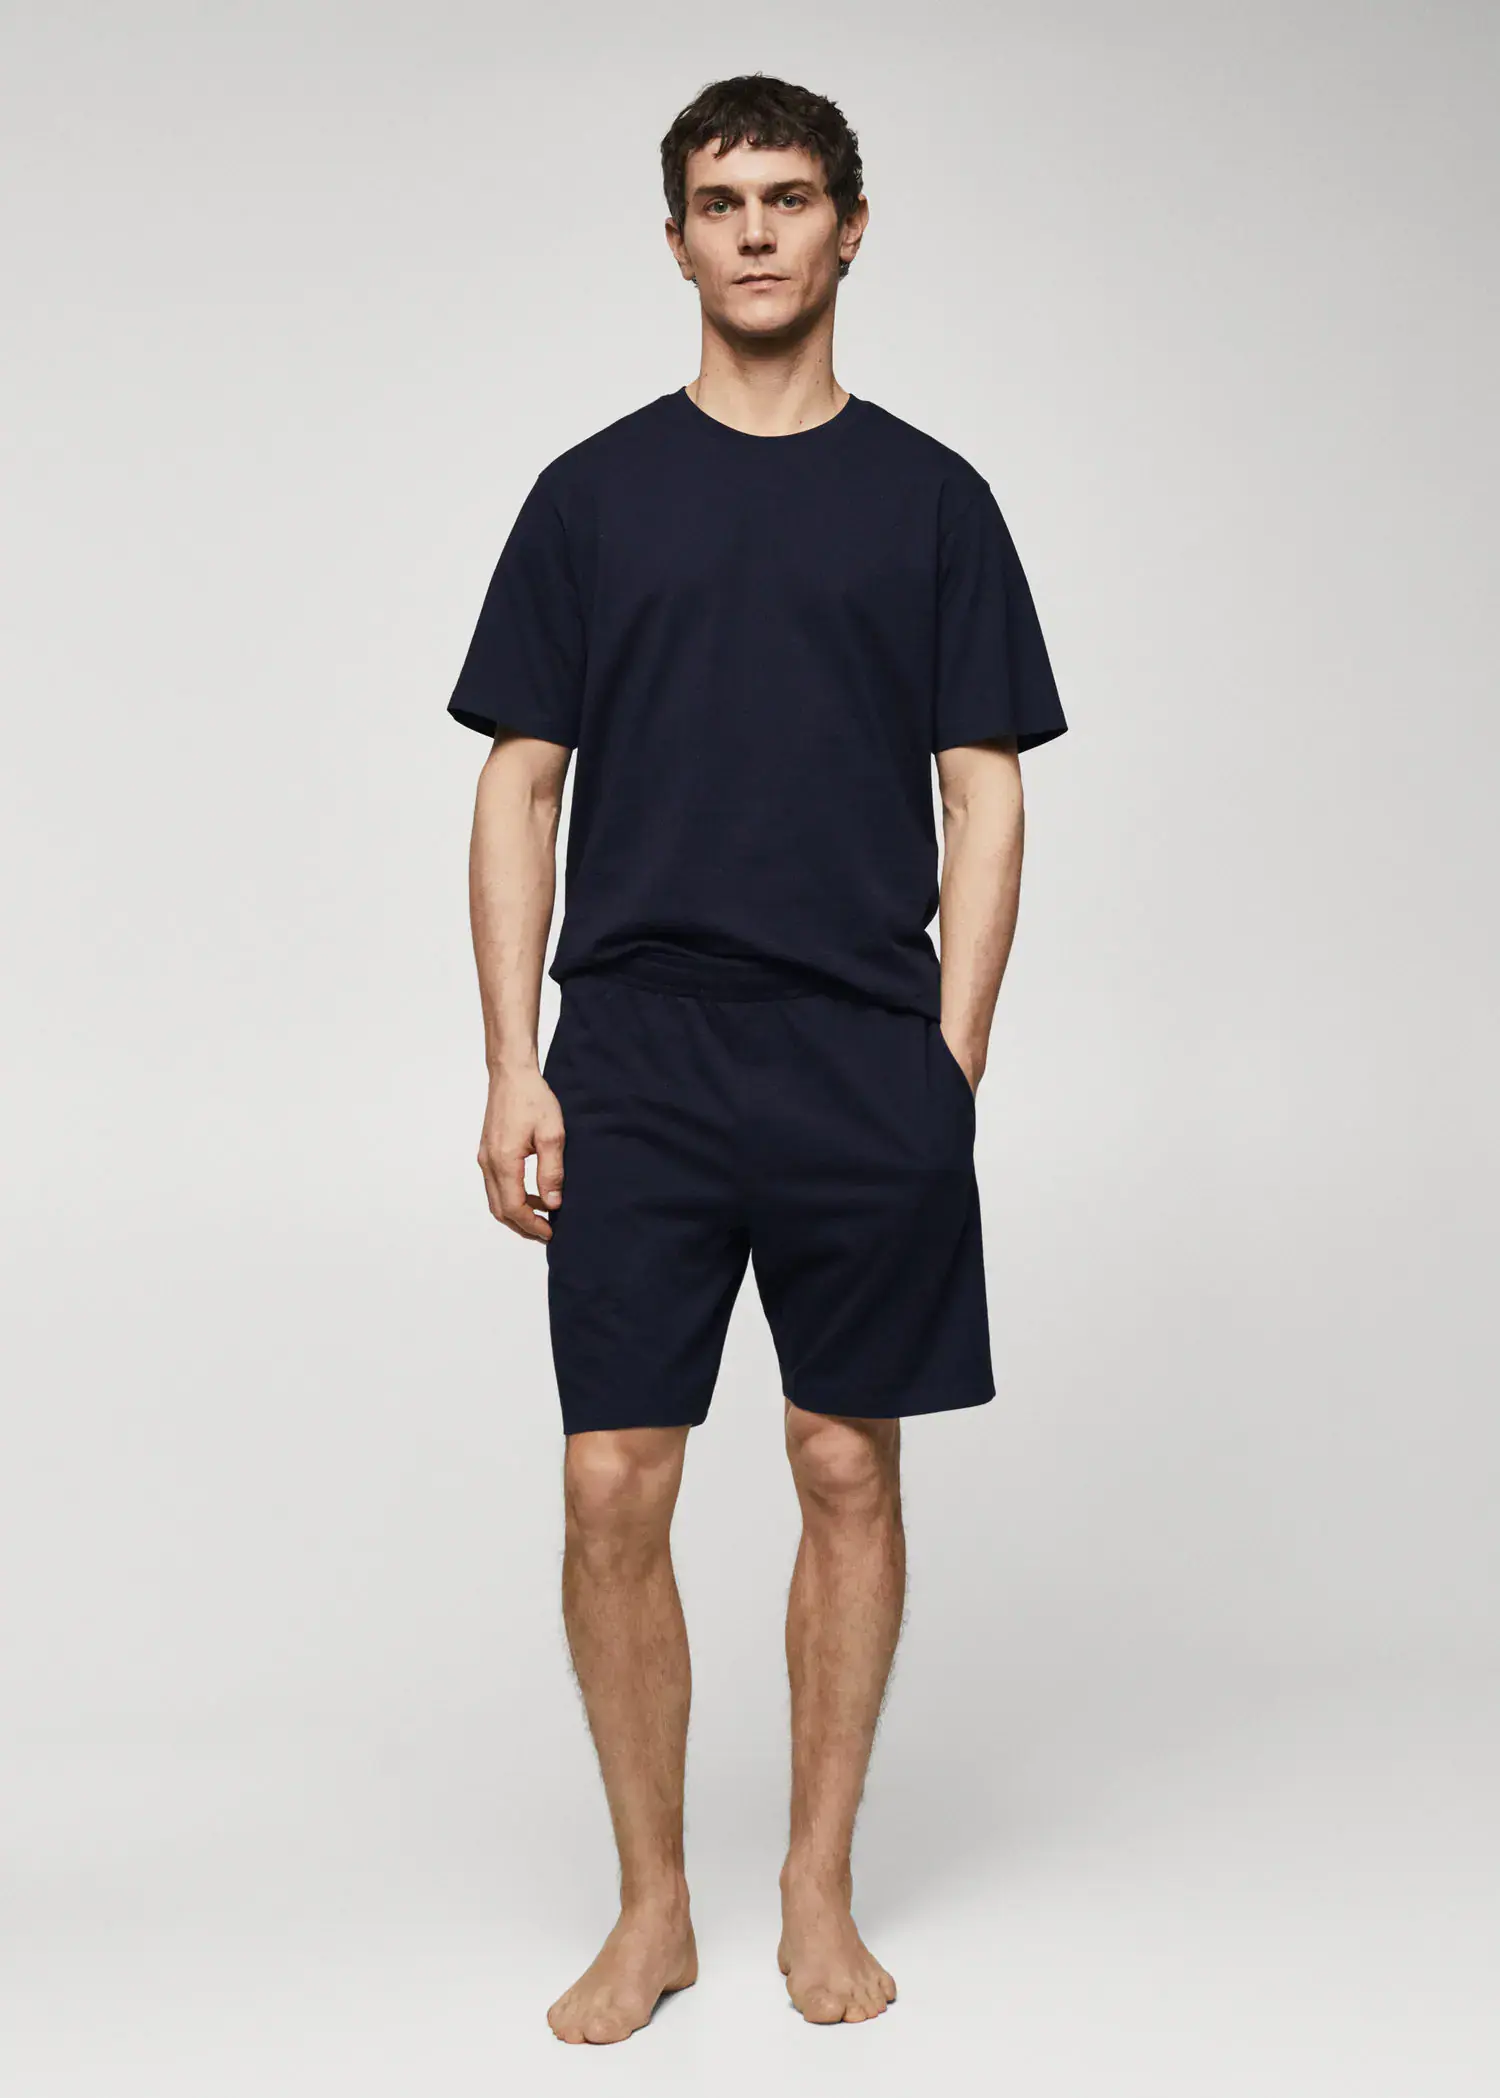 Mango Cotton pyjama shorts pack. a man in black shirt and shorts standing next to a wall. 